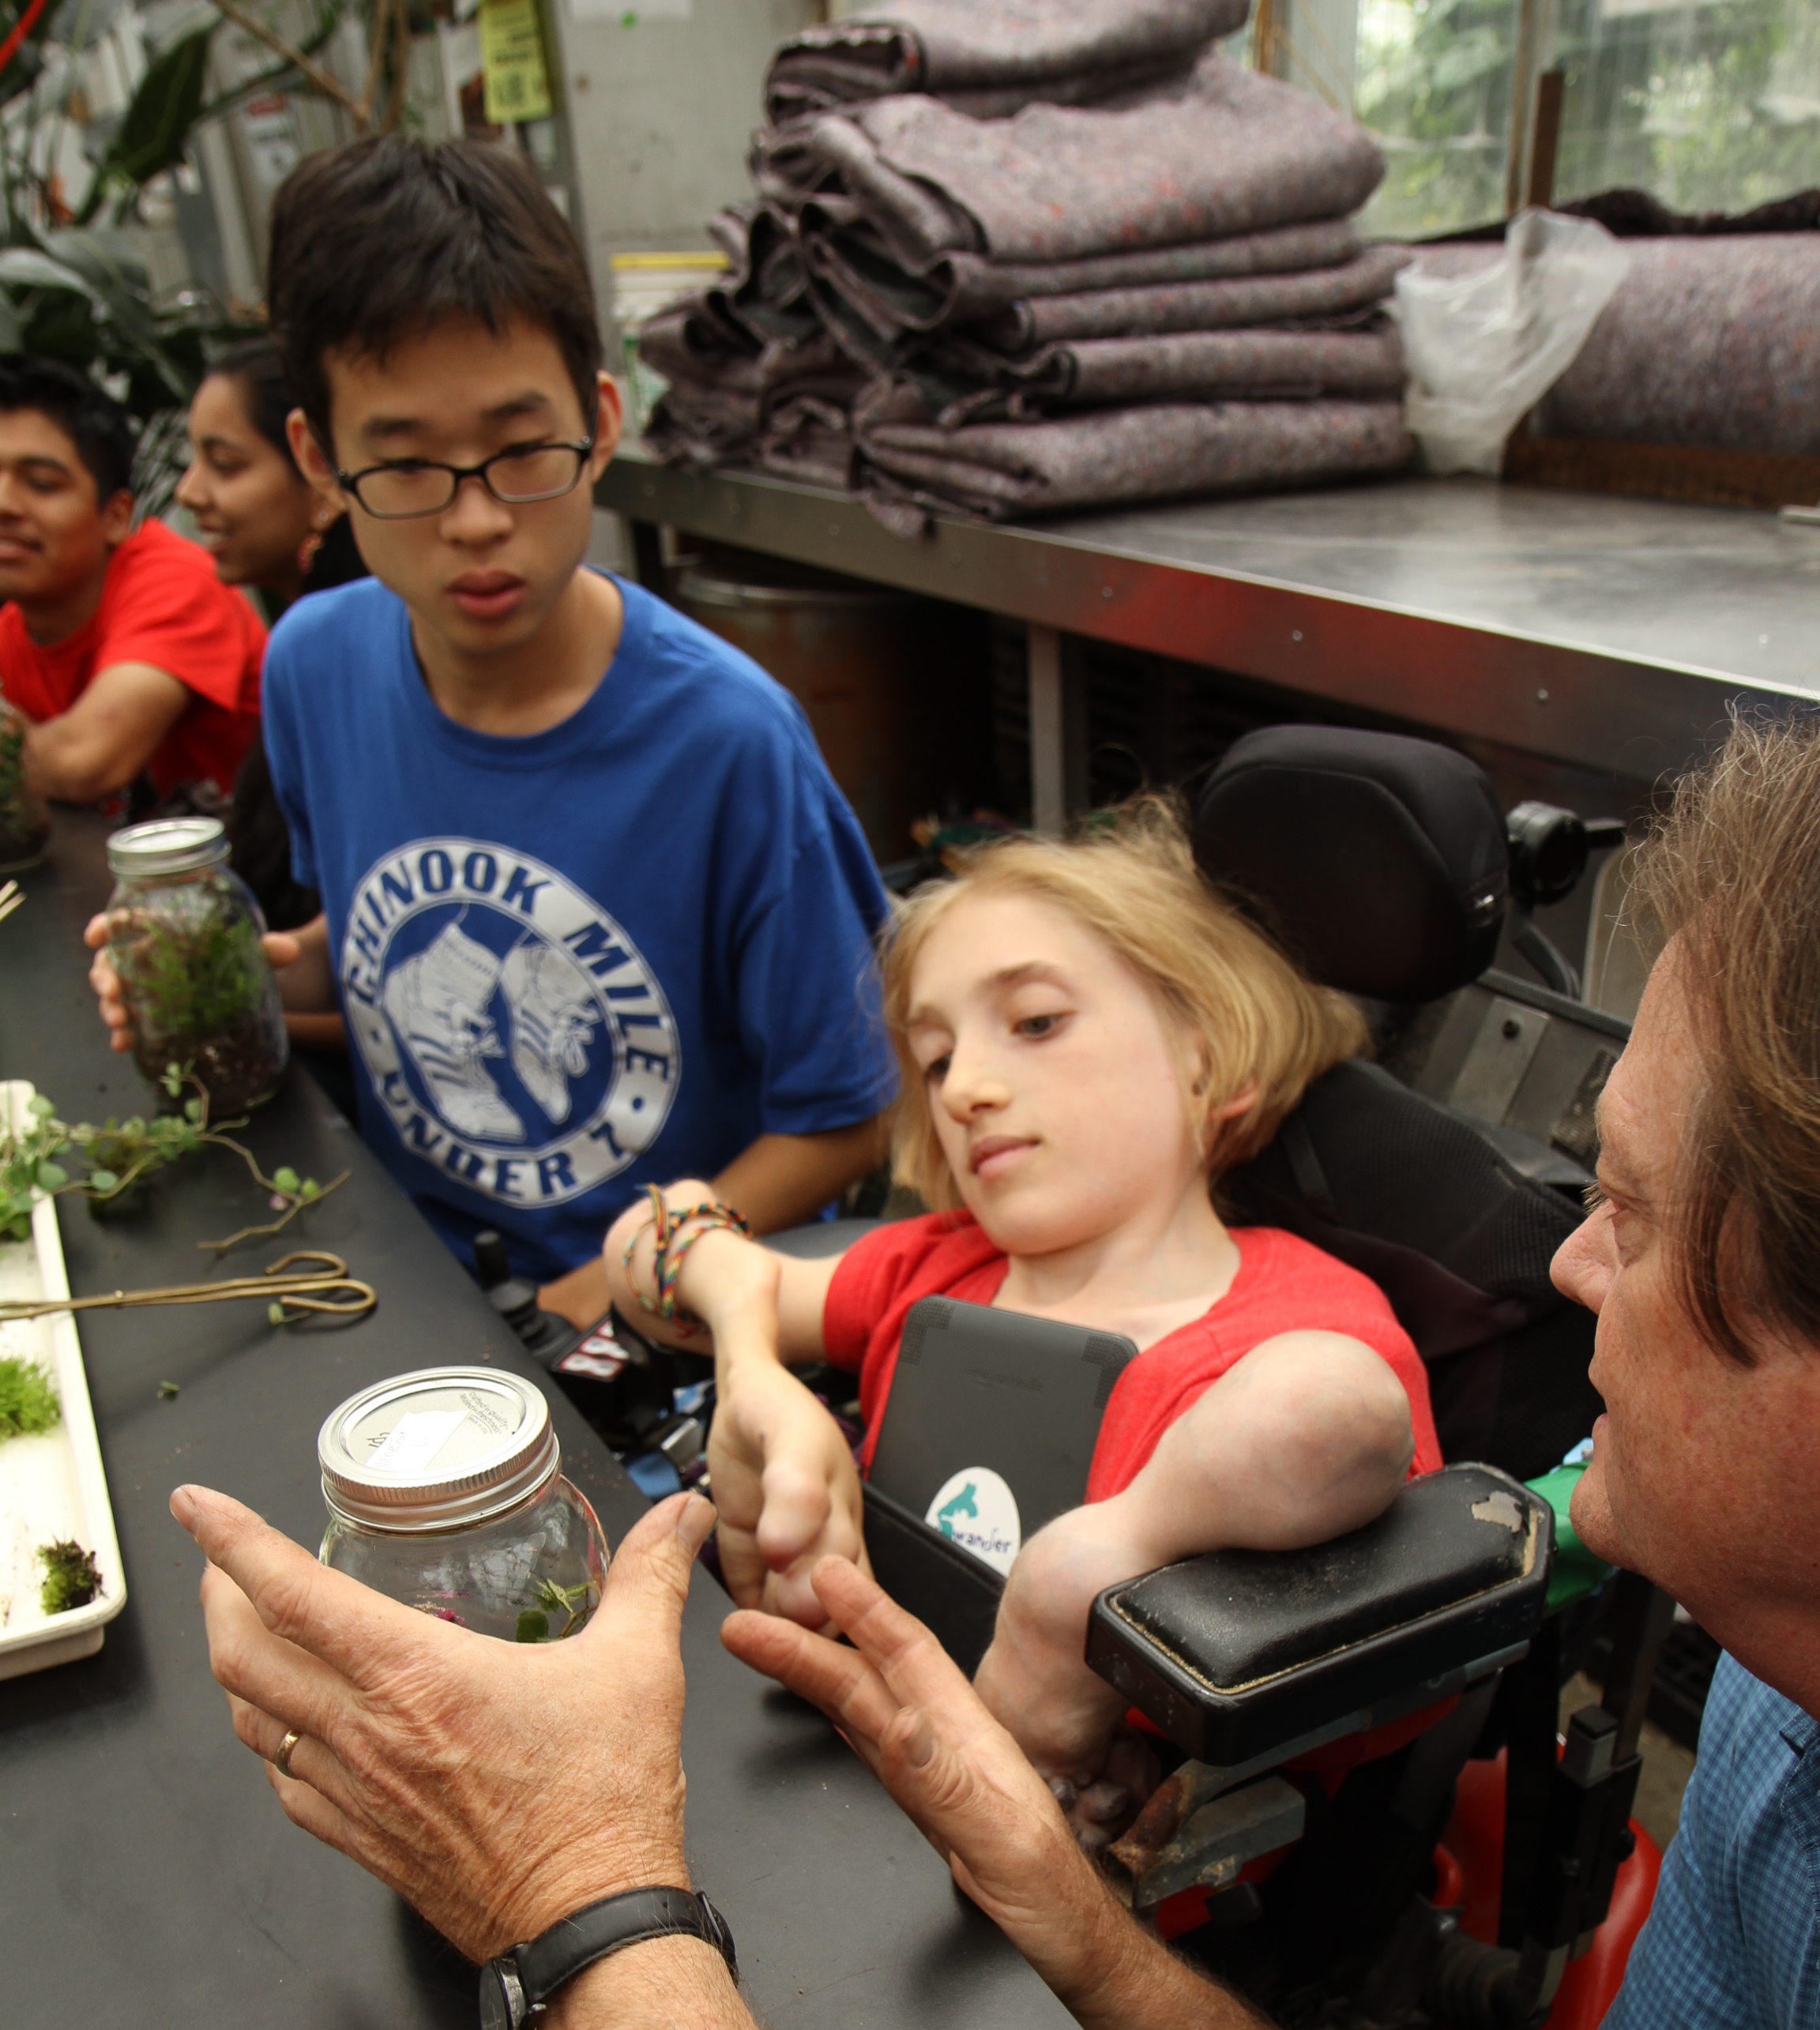 High school students with disabilities learn about the natural world at the UW Botany Greenhouse.